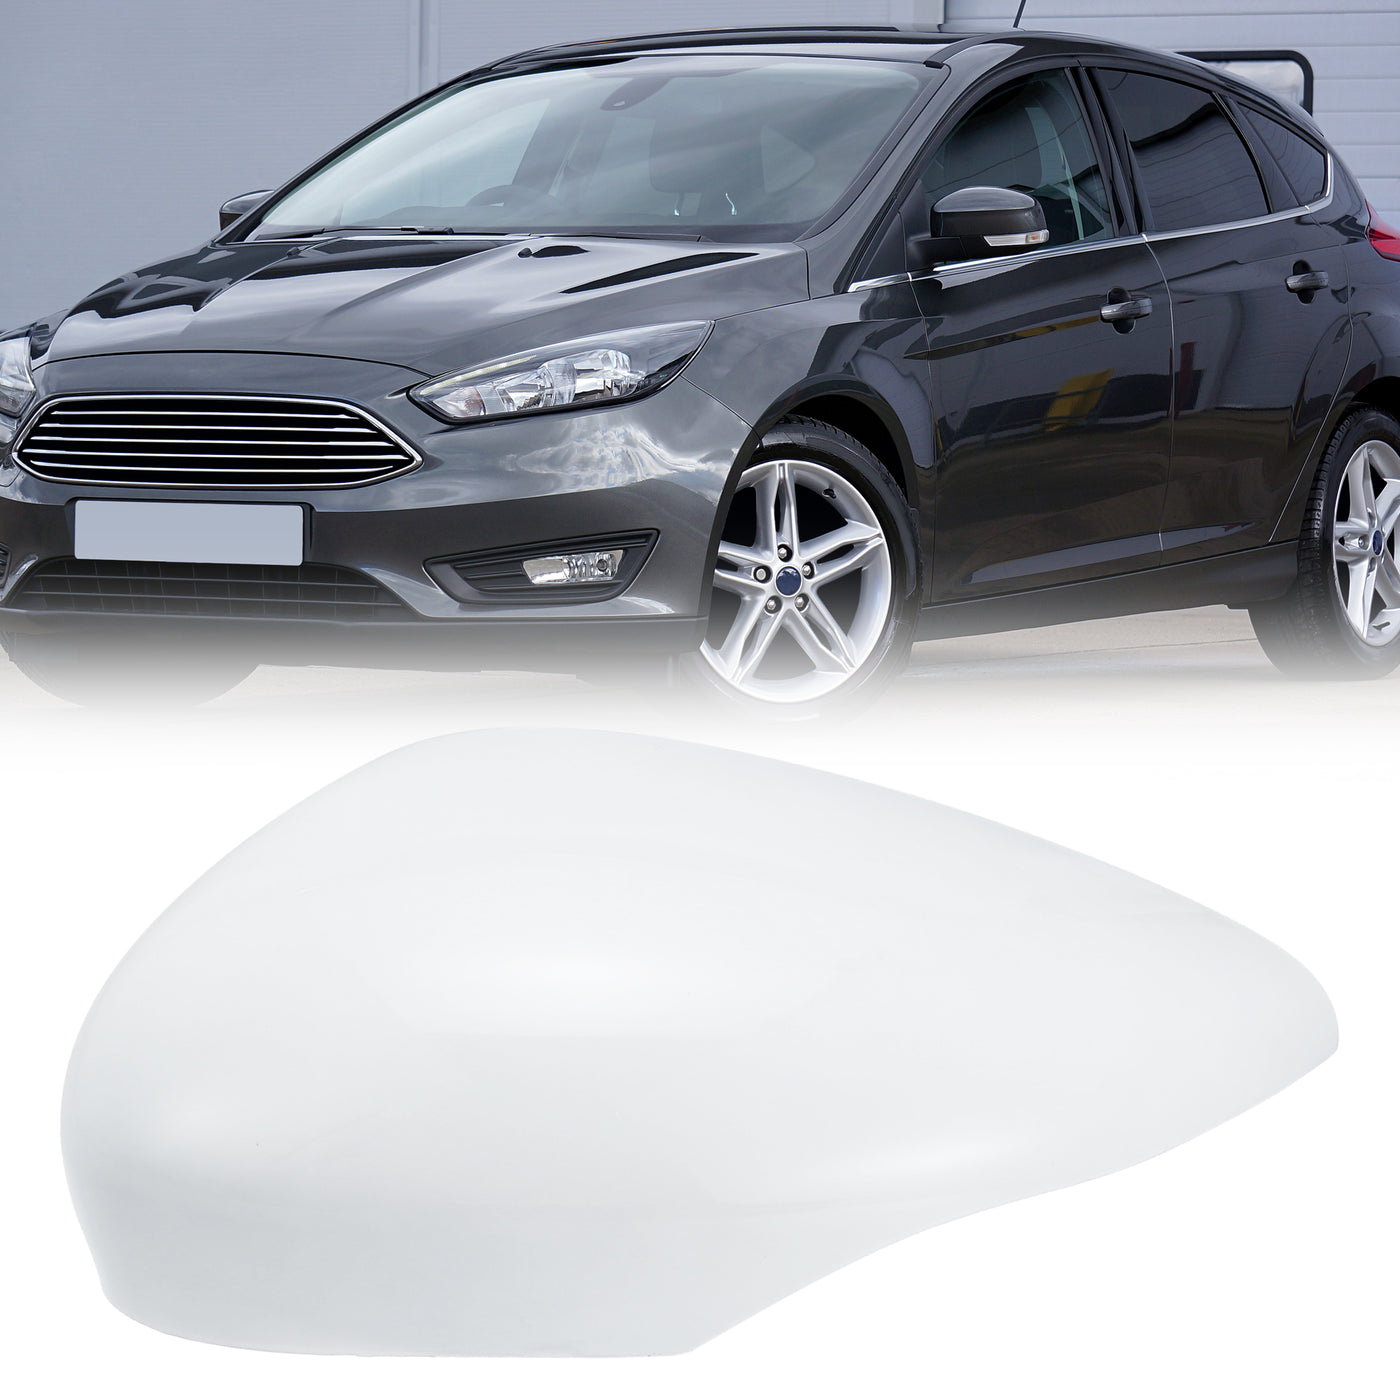 X AUTOHAUX White Left Side Car Side Door Wing Mirror Cover Rear View Mirror Cap for Ford Fiesta MK7 2008 2009 2010 2011 2012 2013 2014 2015 2016 2017